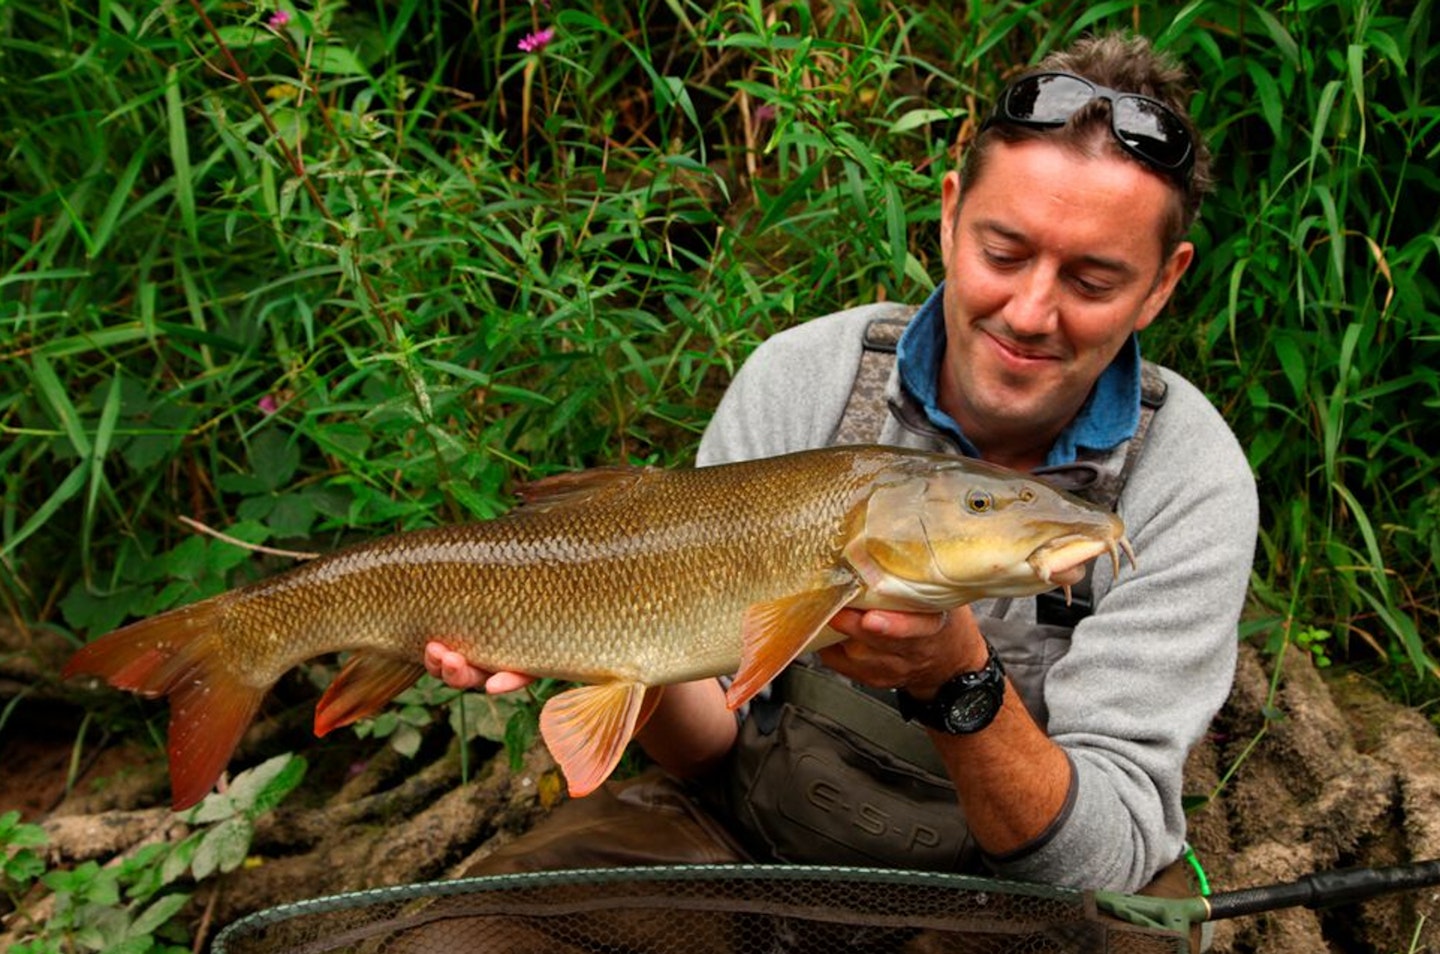 The barbel are doing fine and the chub fishing is better than ever, but it’s likely they’re using bankside features, such as trees and bushes, for shelter